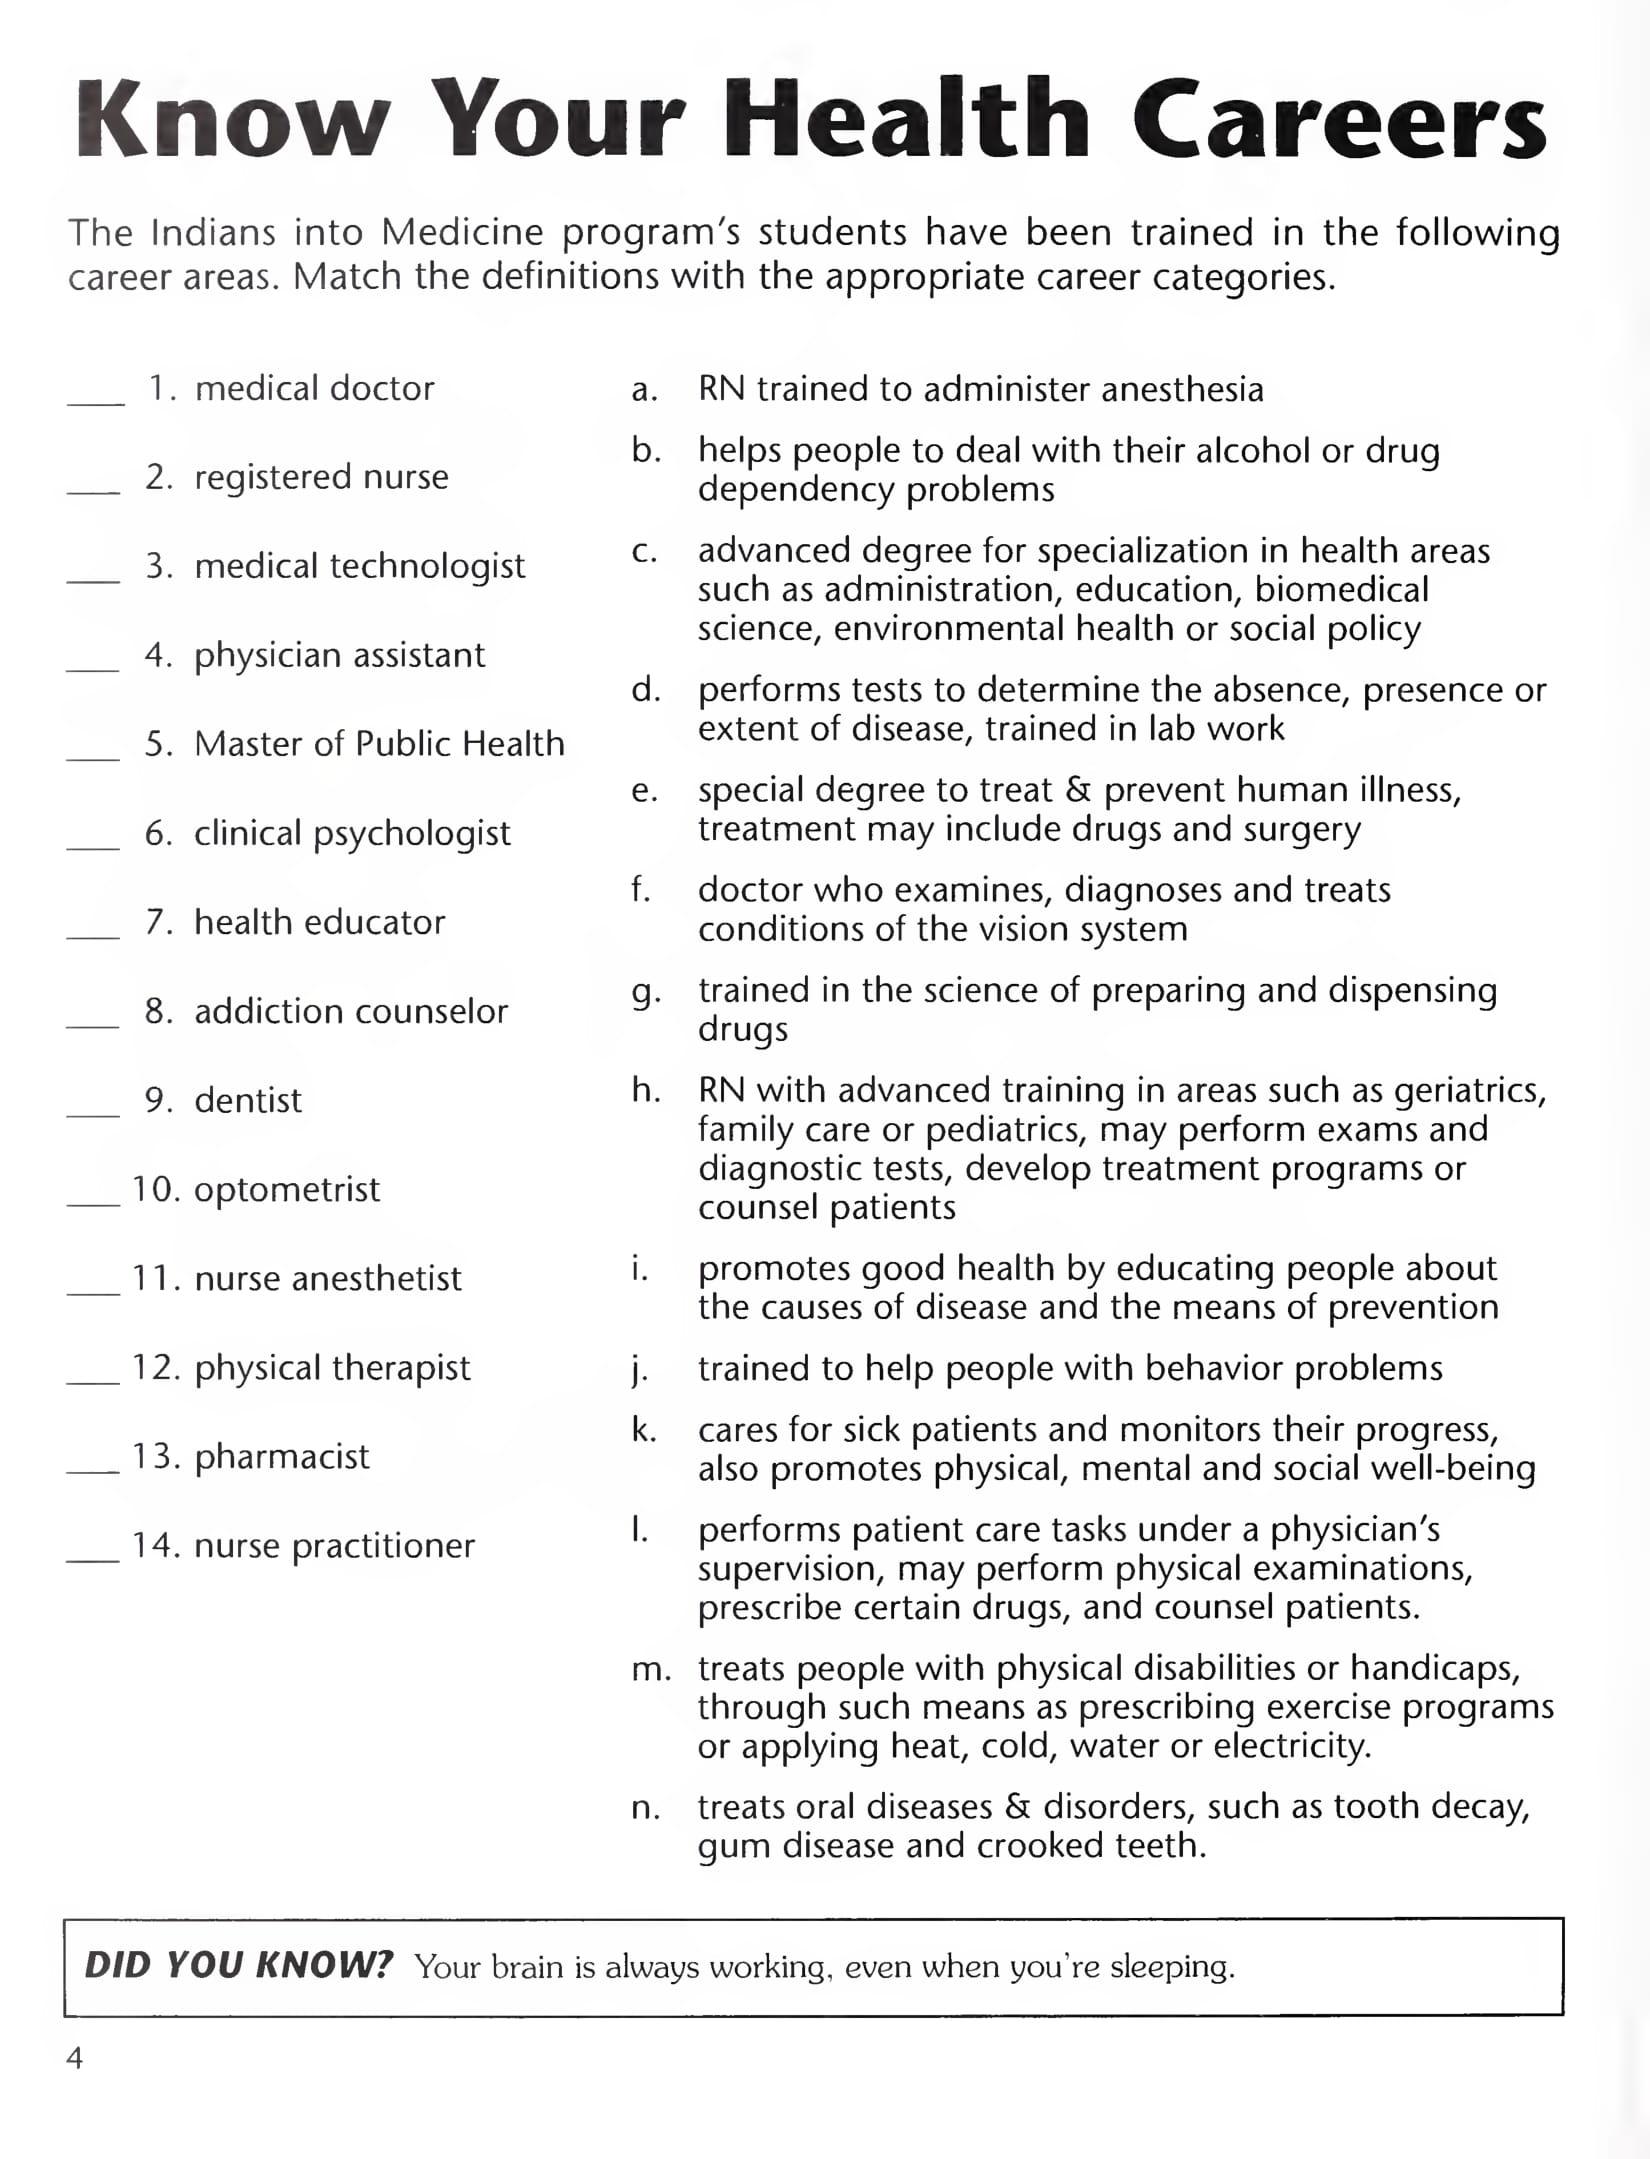 Know your health careers worksheet free printable puzzle games